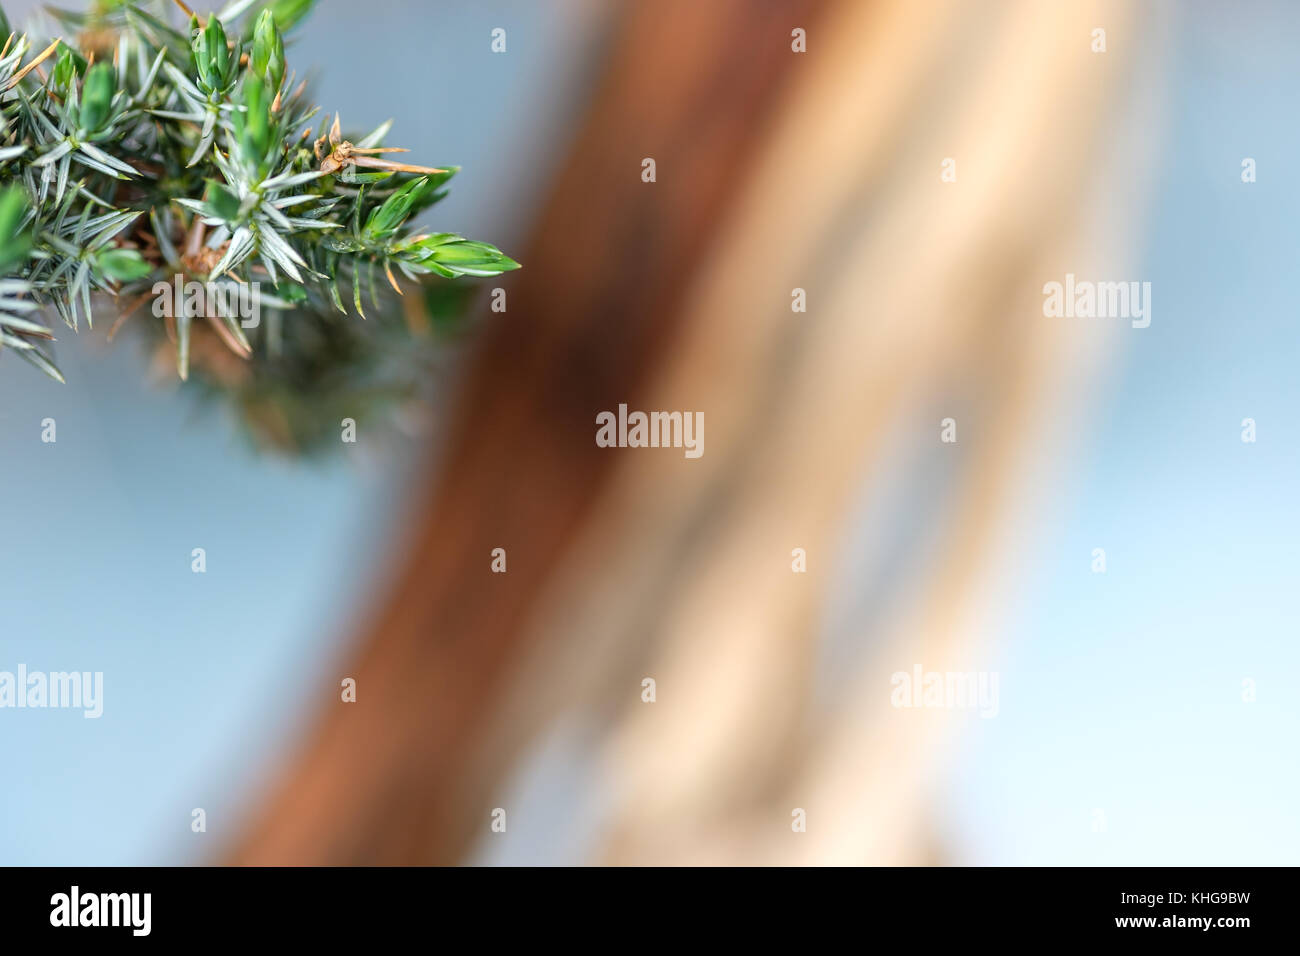 Green juniper needles of a bonsai tree with blurred trunk Stock Photo